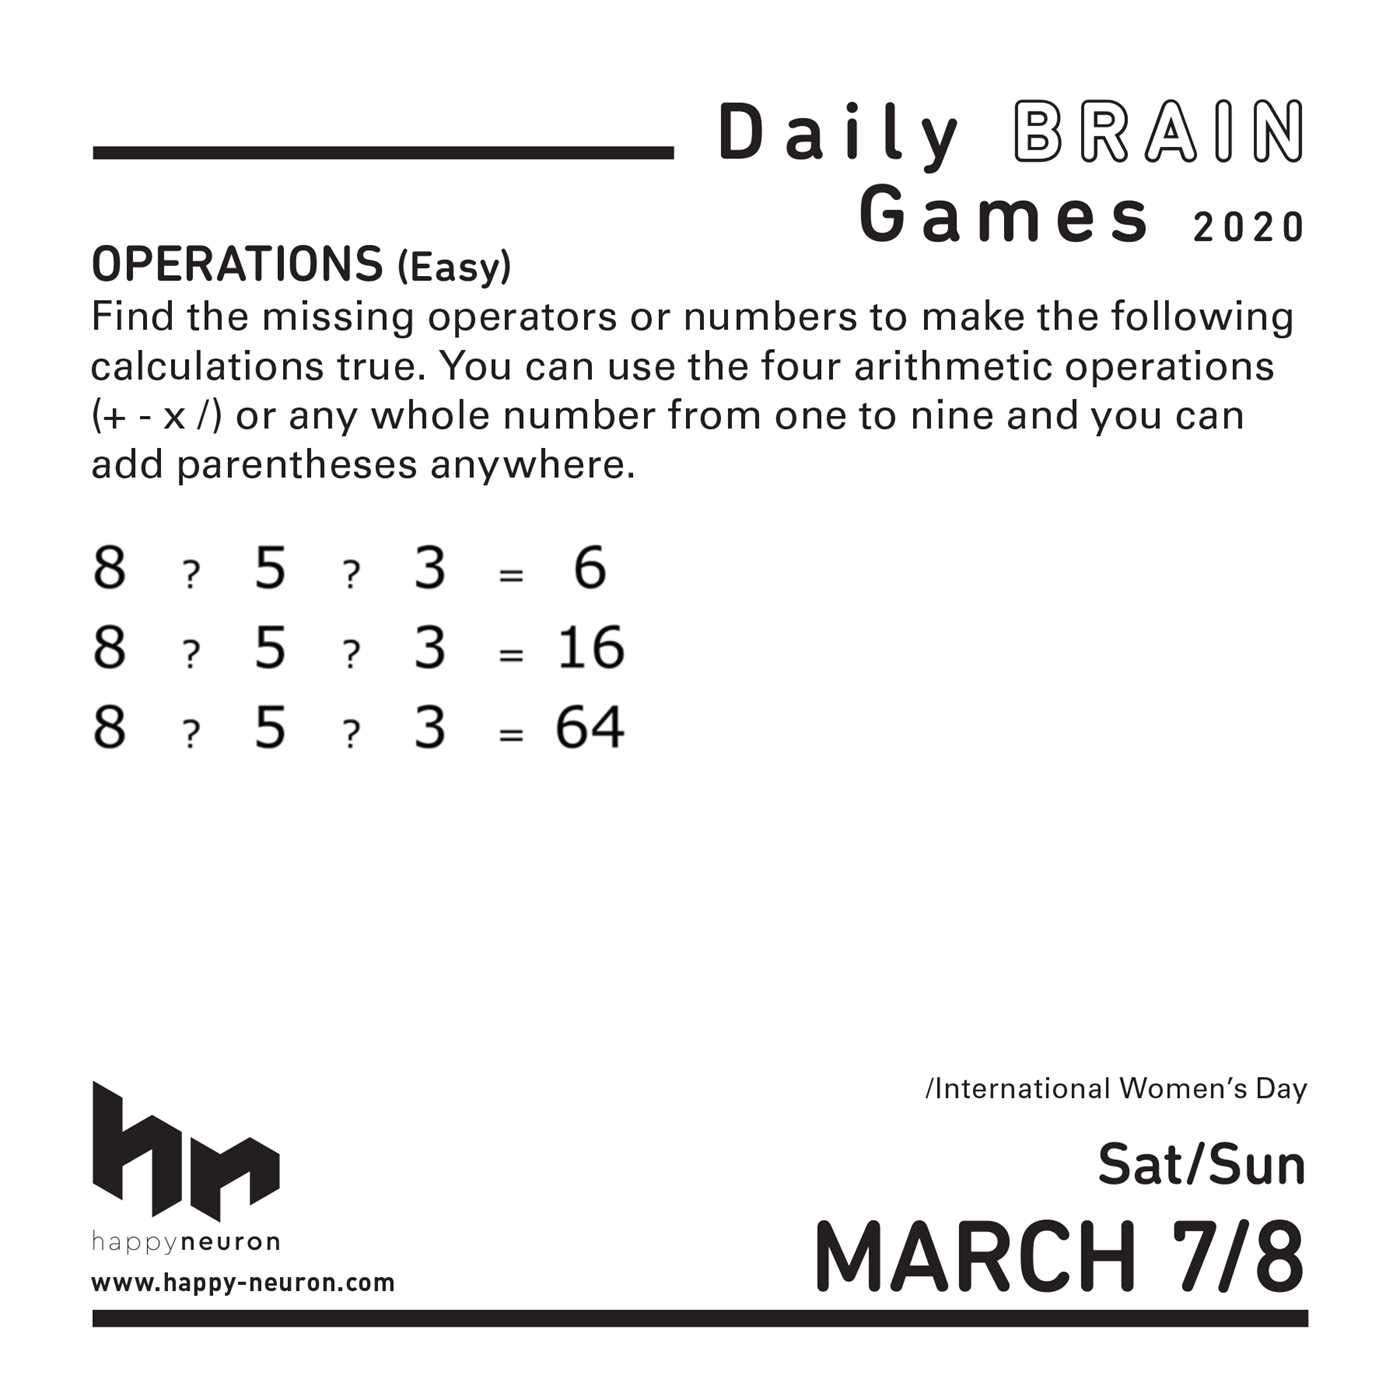 daily-brain-games-2020-day-to-day-desk-calendar-new-an-ideal-gift-50837424586-ebay